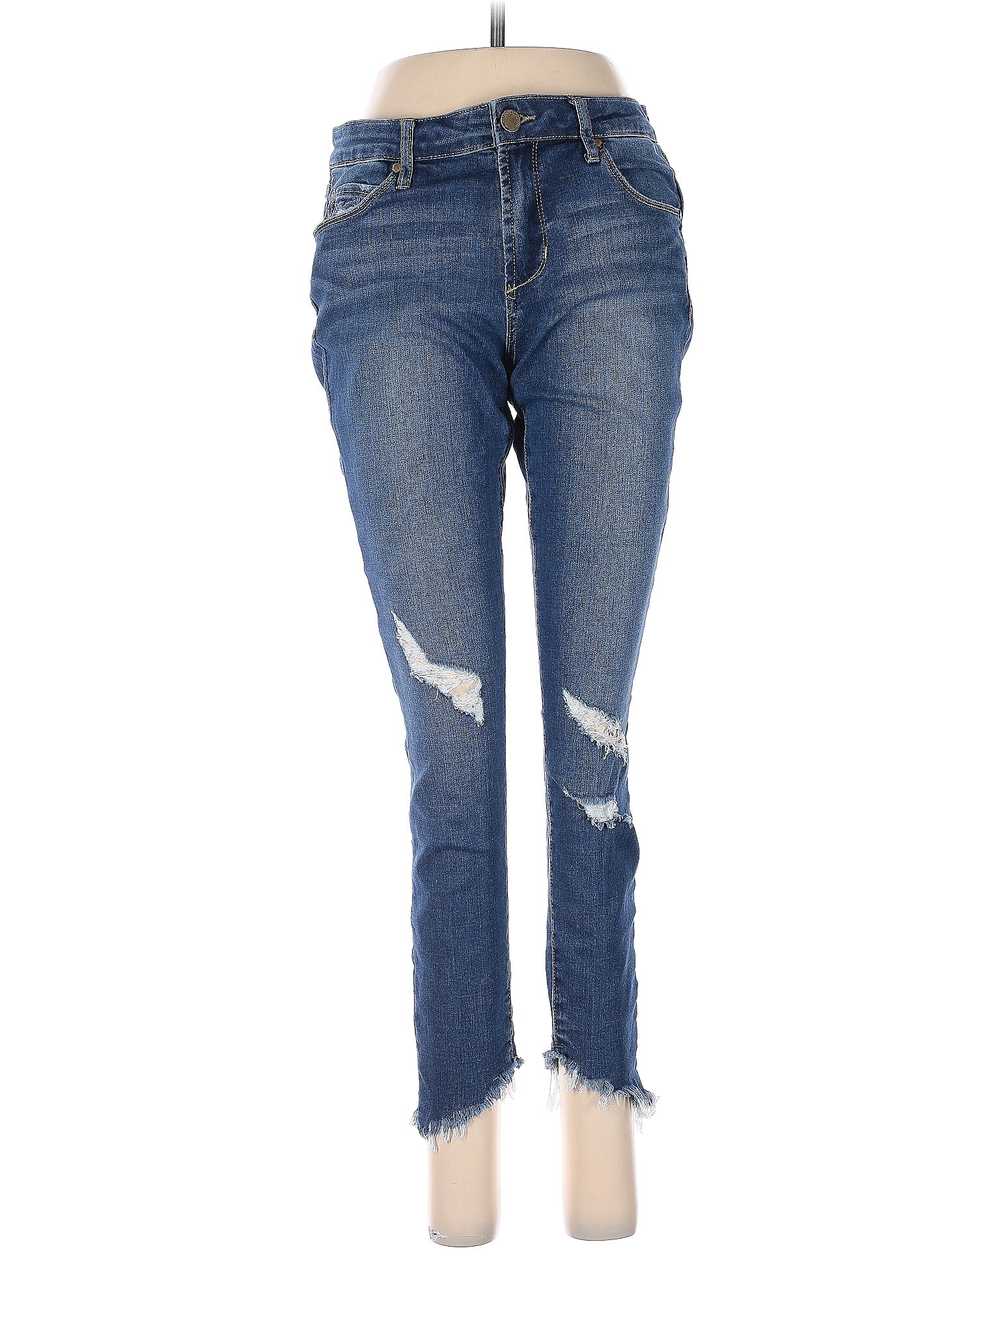 Articles of Society Women Blue Jeans 27W - image 1